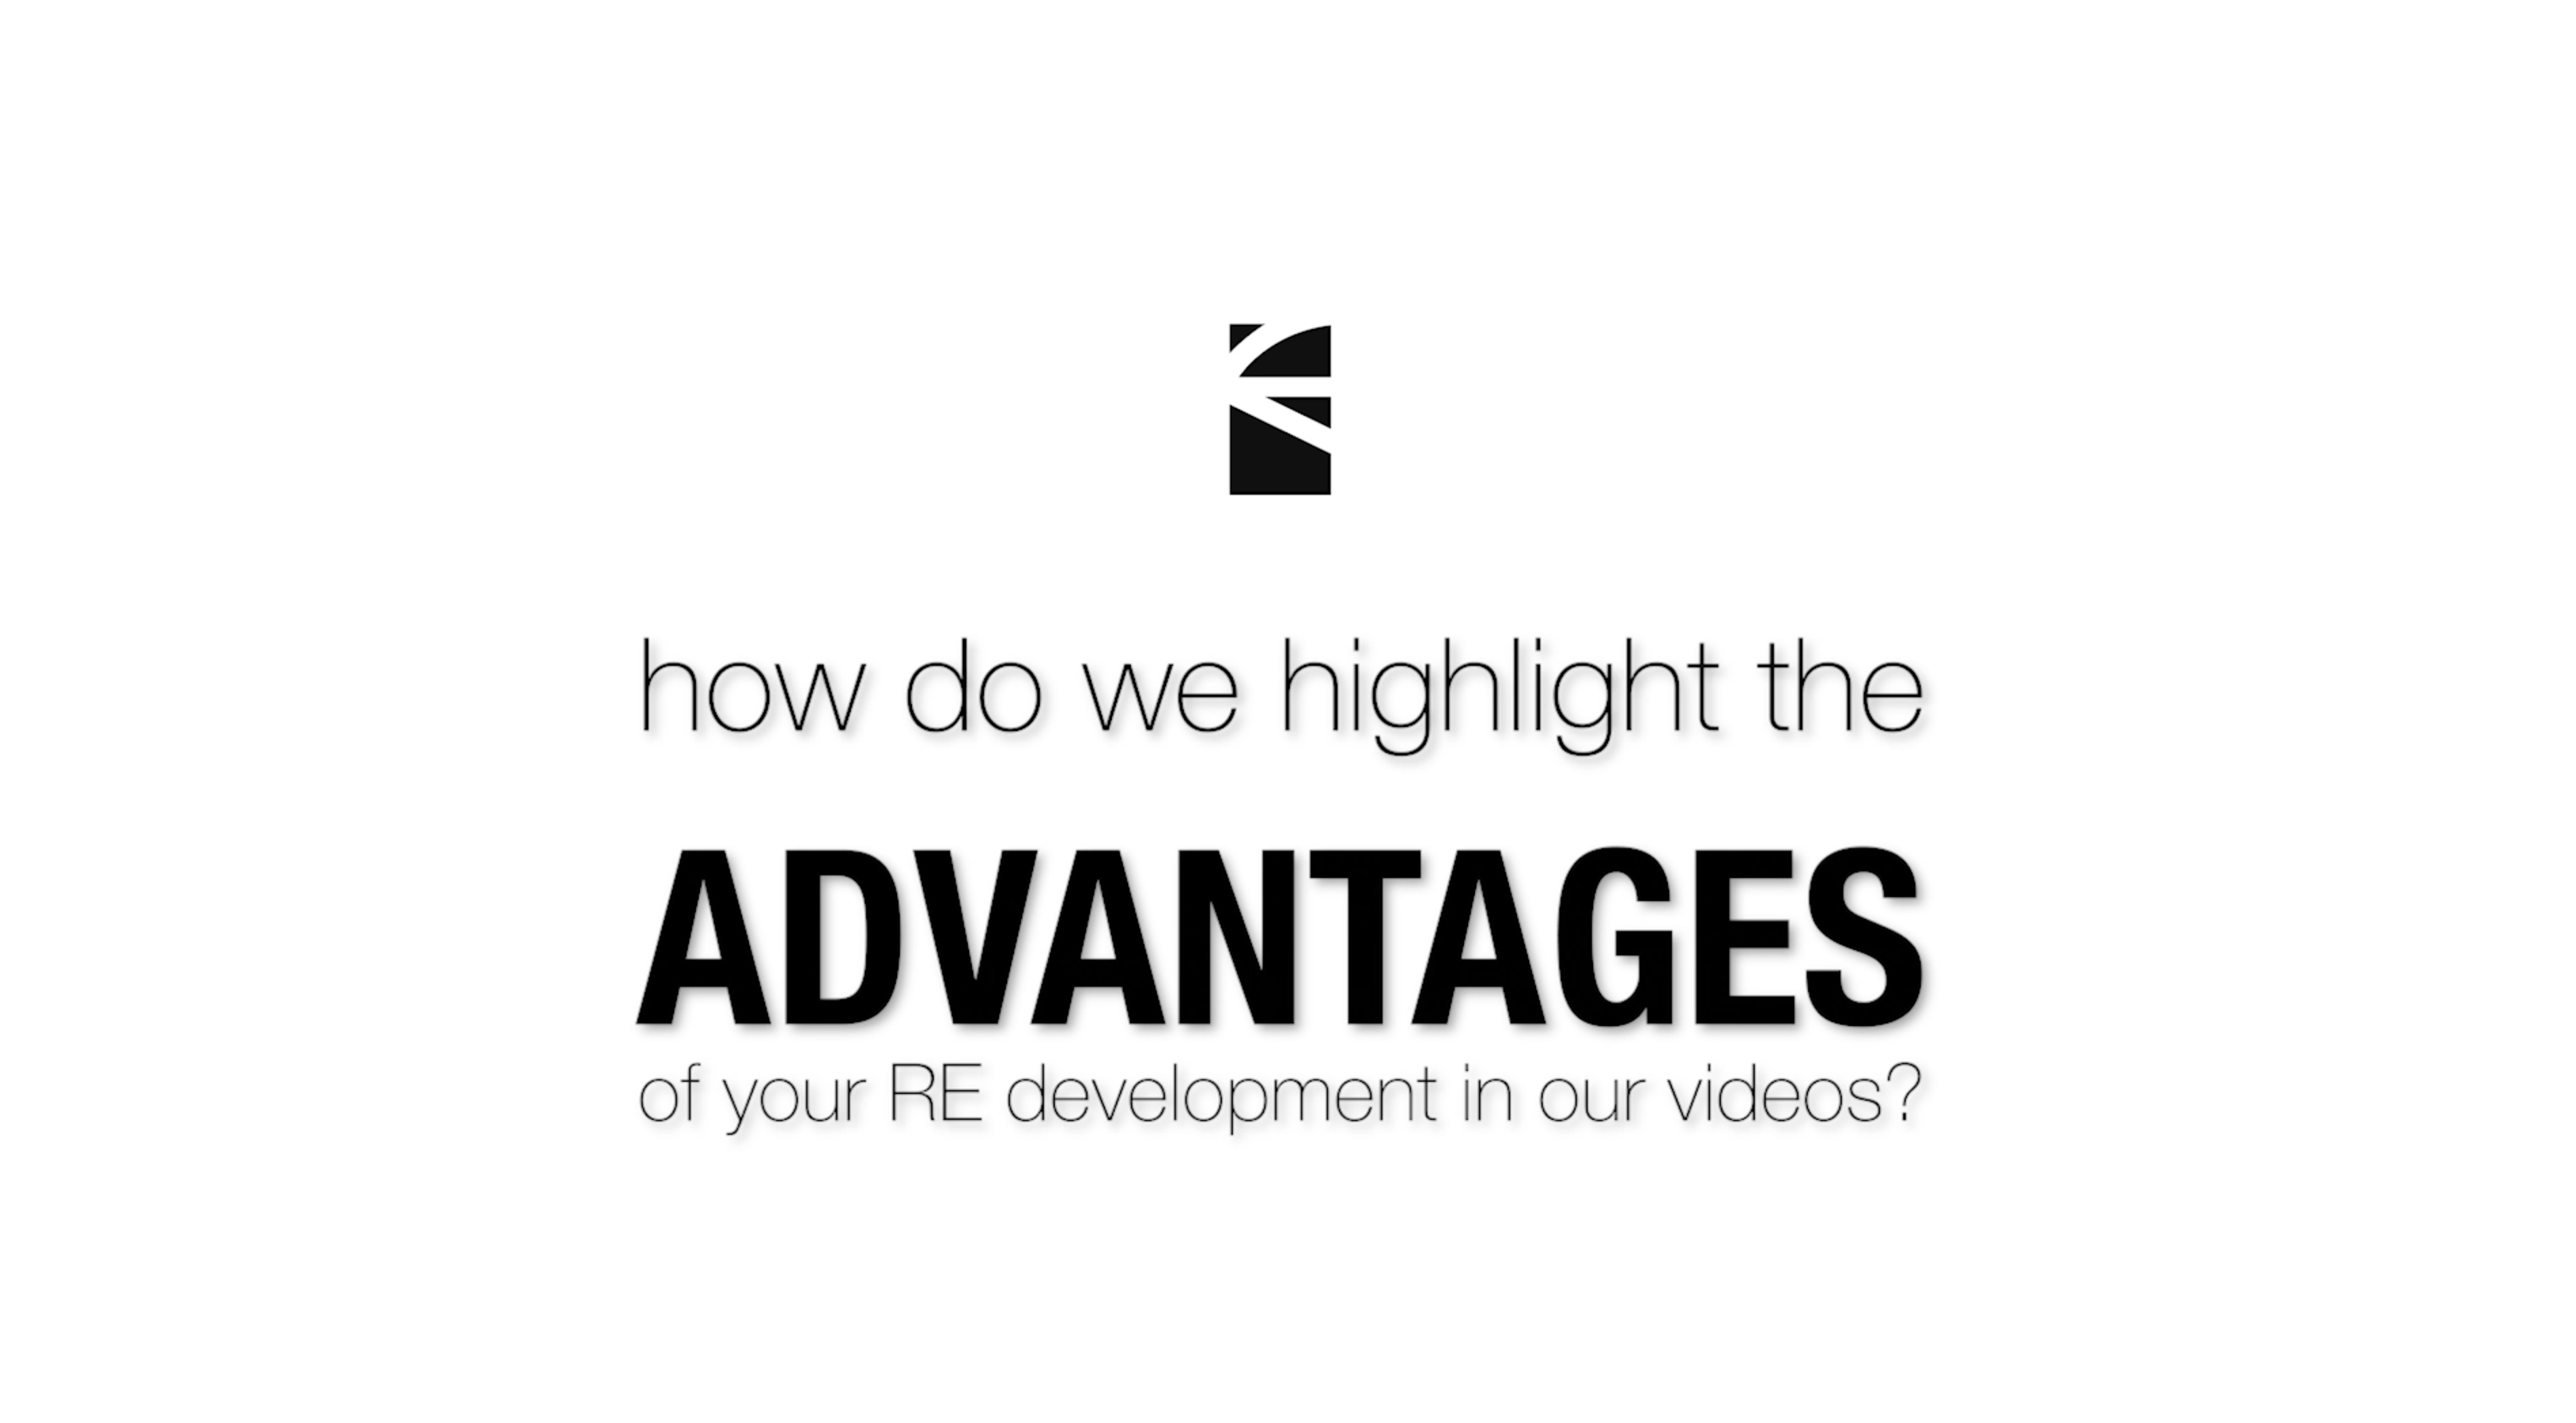 How do Gi highlight the ADVANTAGES of your RE development in our videos?